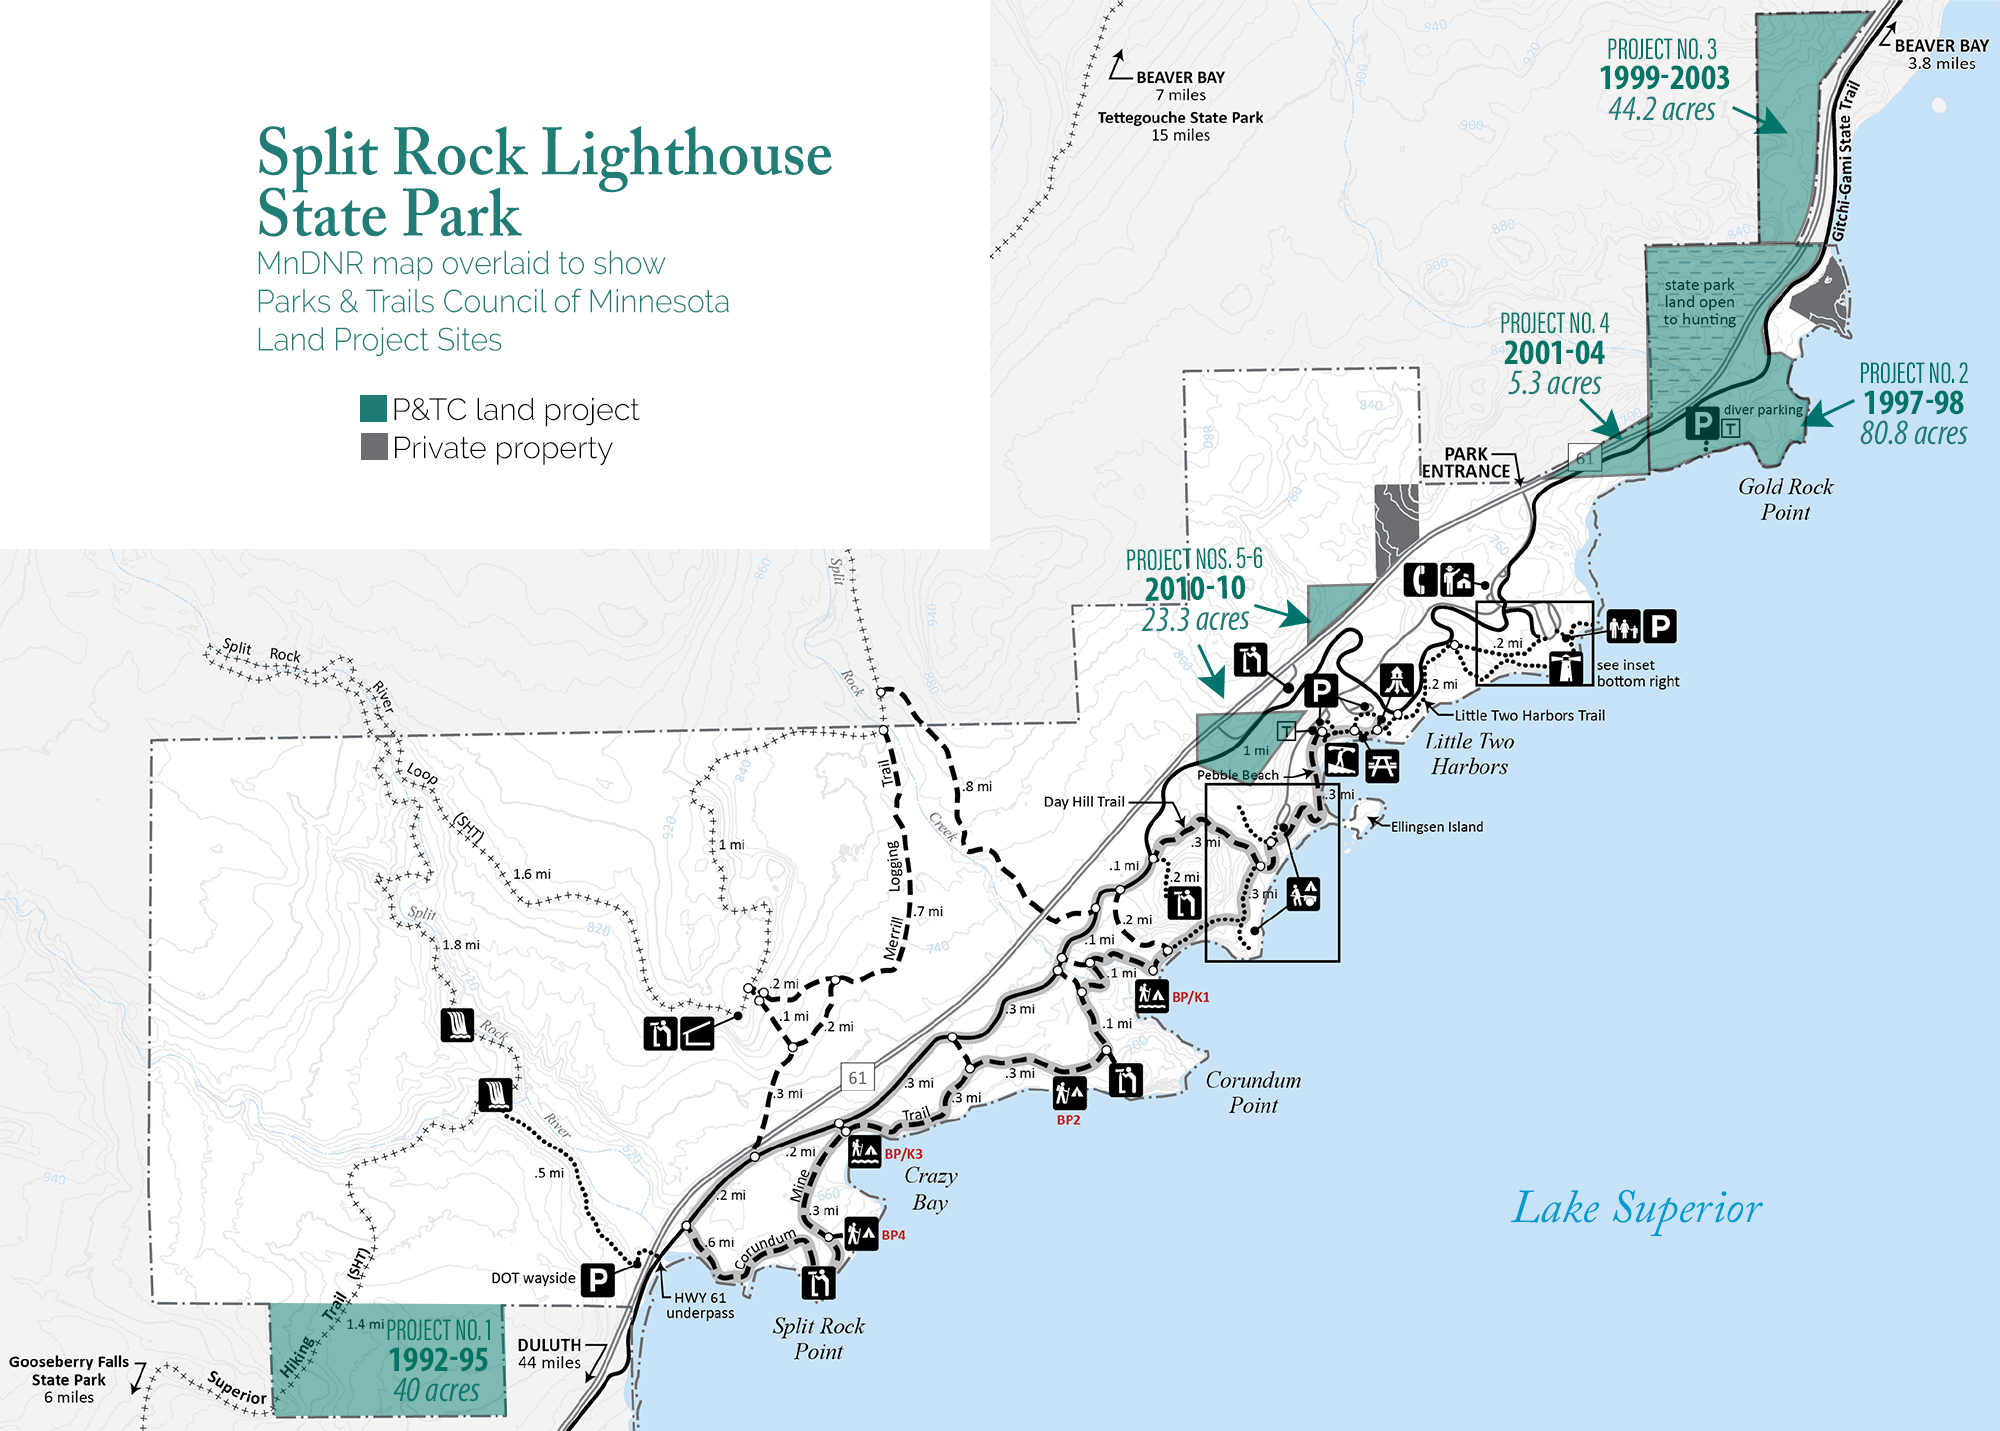 Map of Split Rock Lighthouse with overlay